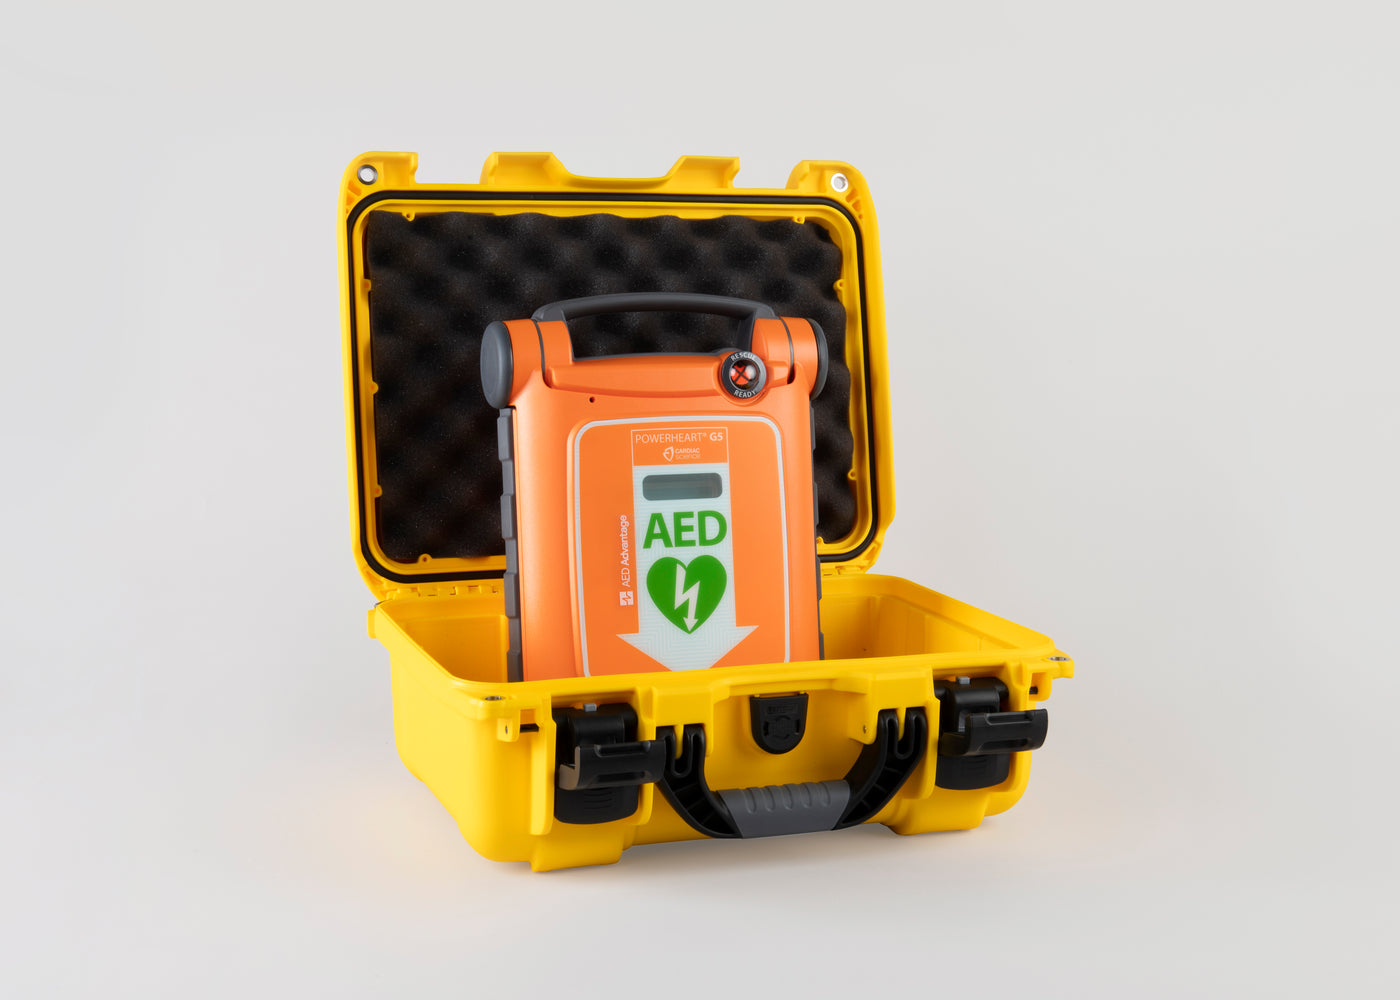 An orange Powerheart G5 AED inside a bright yellow hardshell carry case